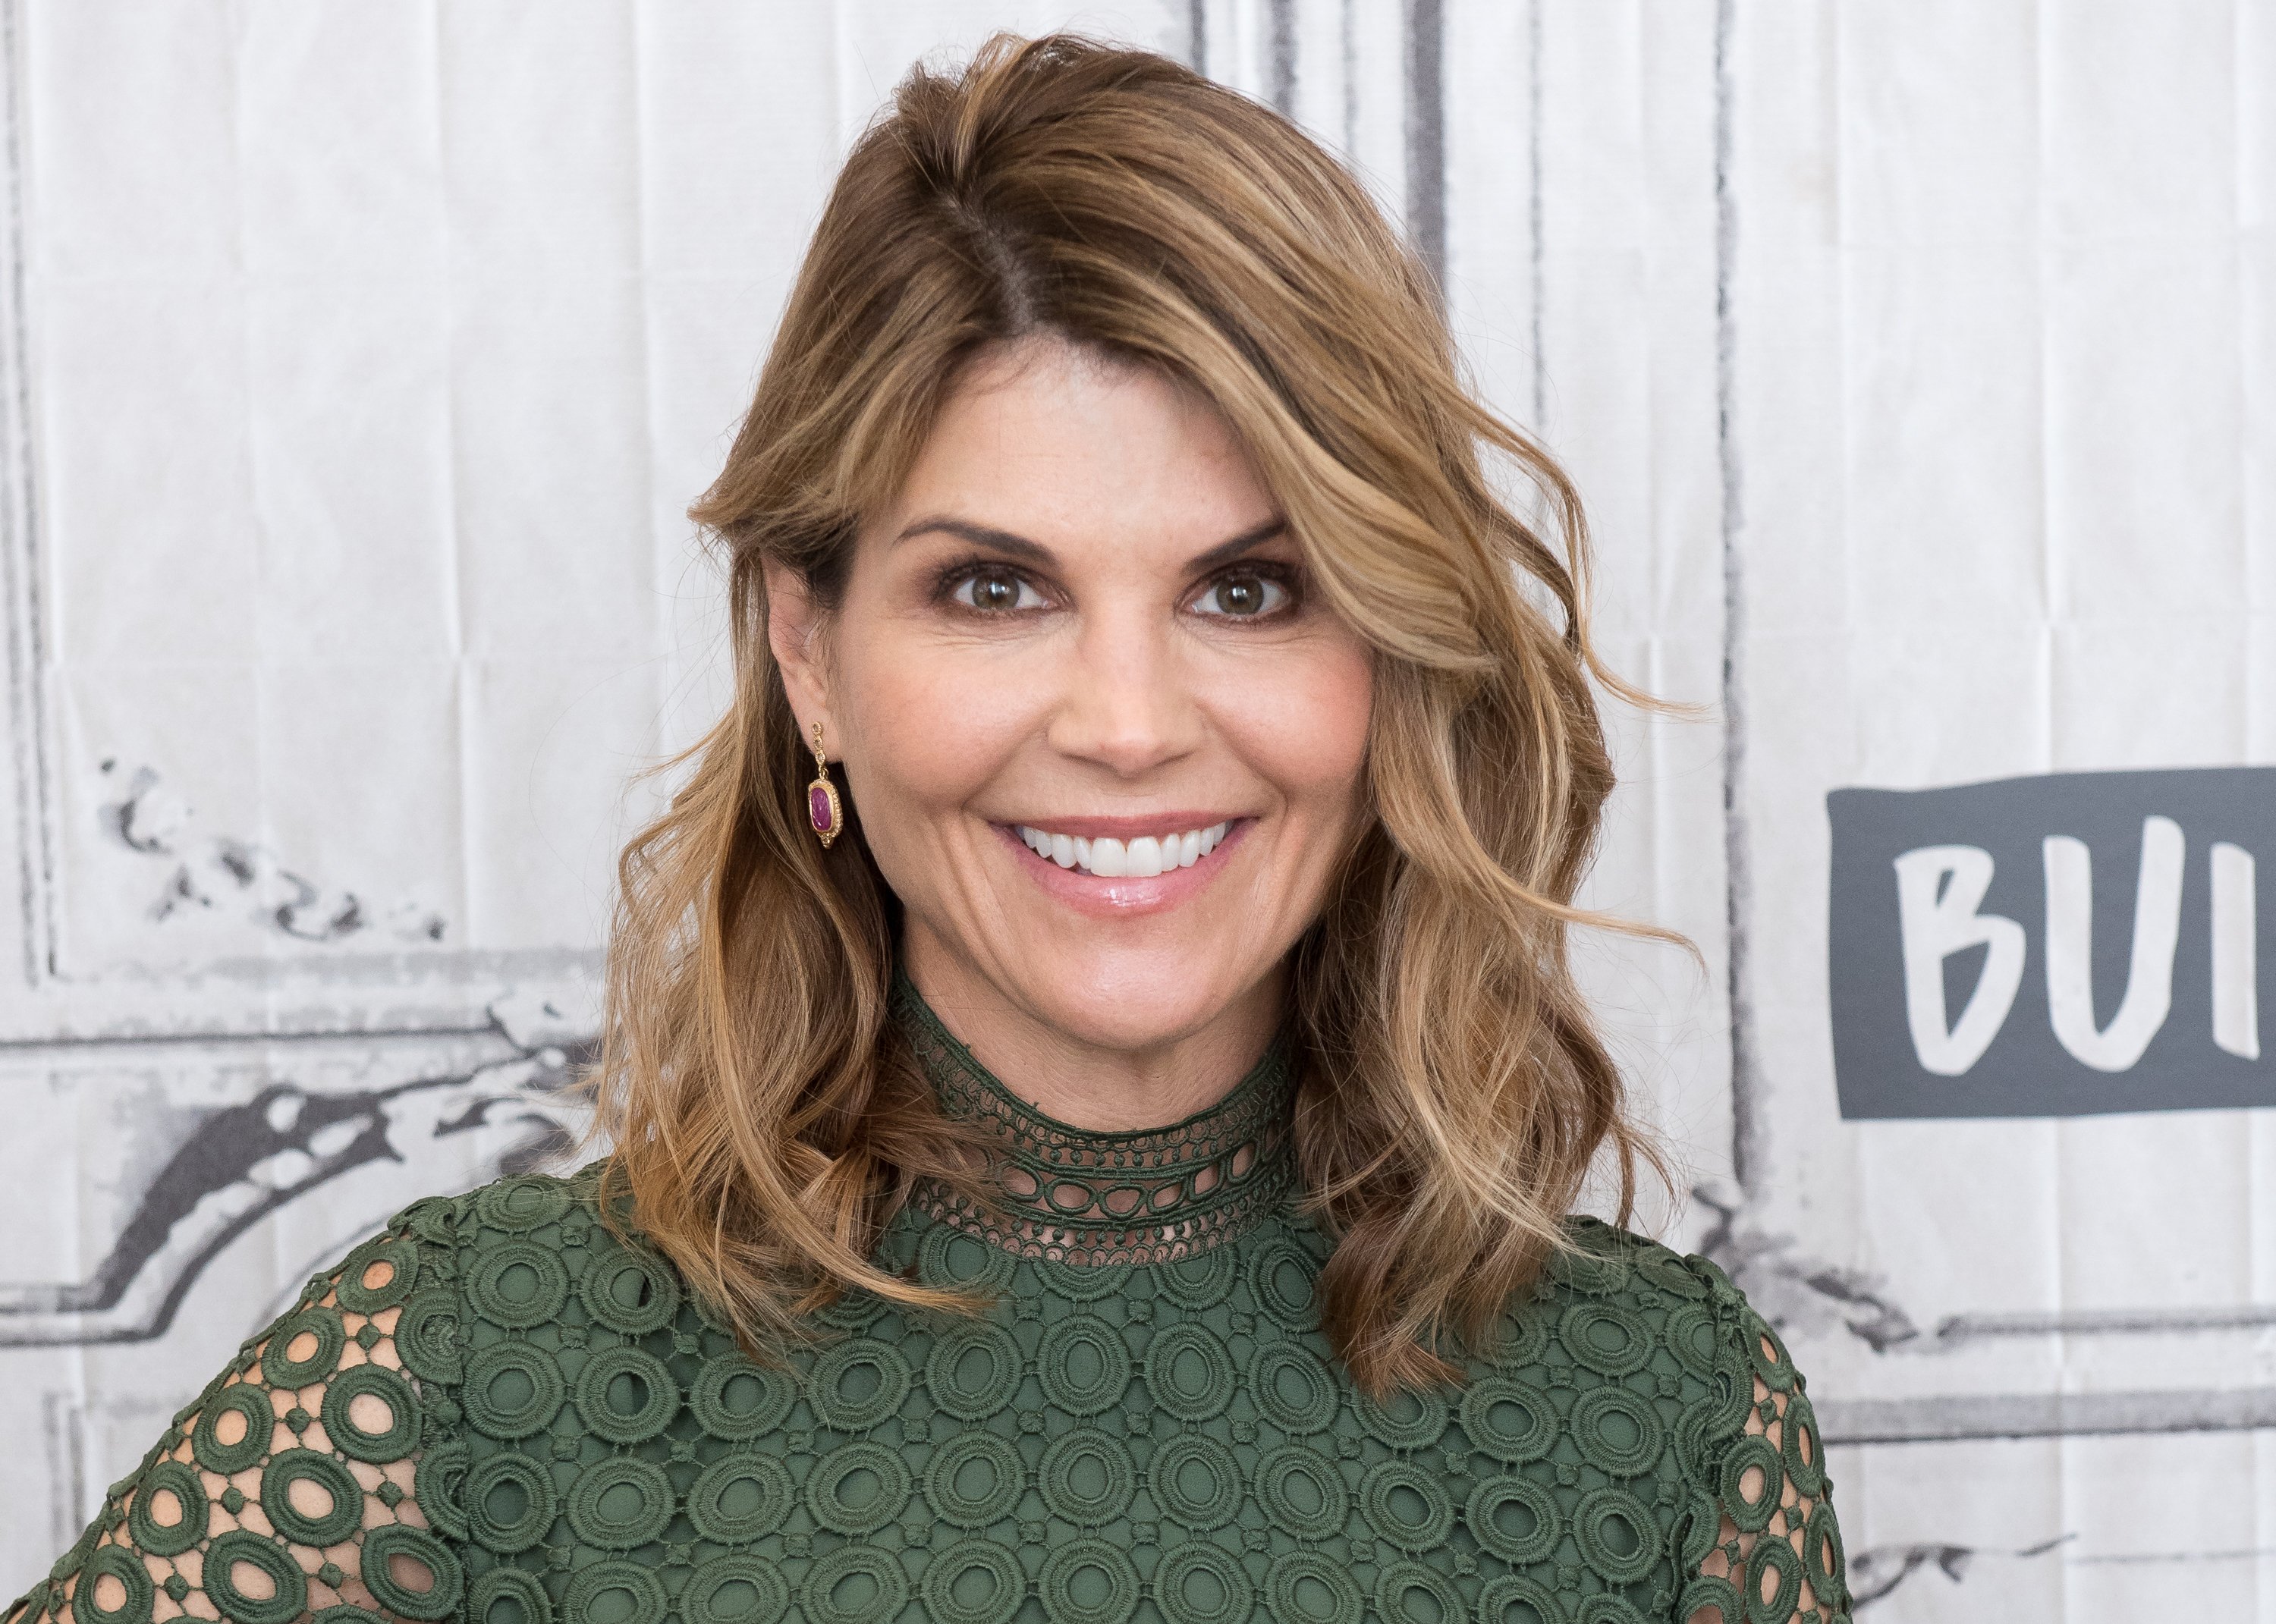 Lori Loughlin visits Build Series at Build Studio in New York City on February 15, 2018. | Photo: Getty Images